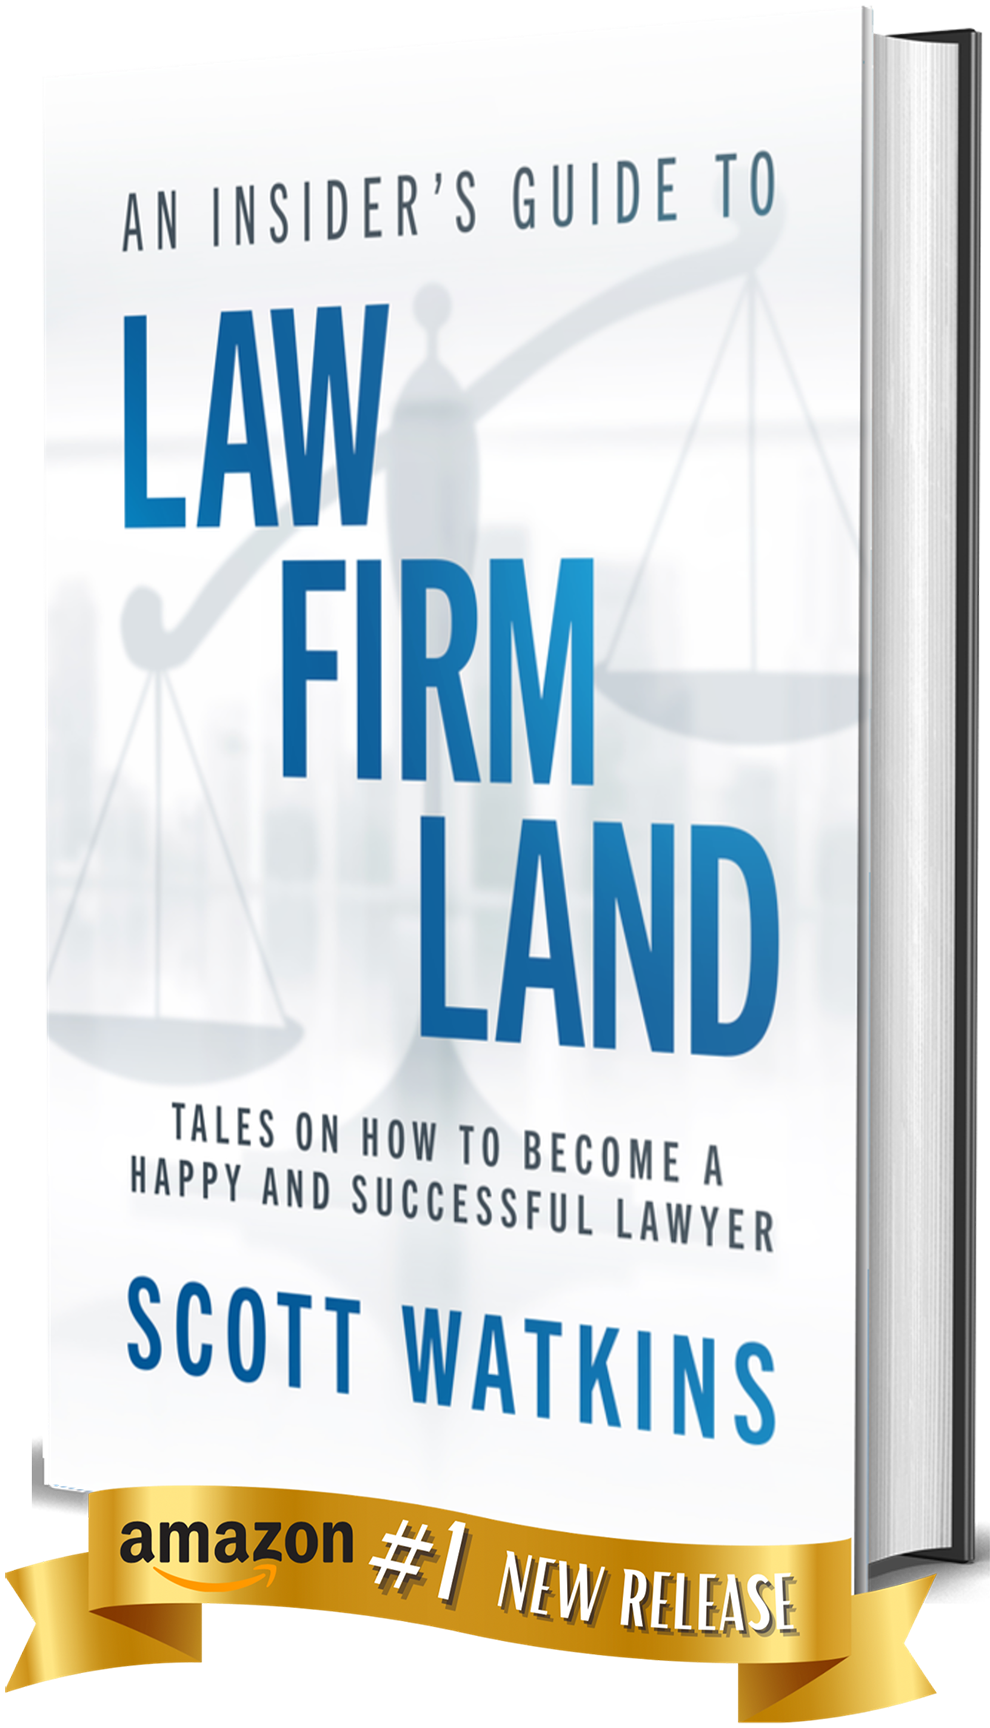 An Insider's Guide to Law Firm Land: Tales on How to Become a Happy and Successful Lawyer